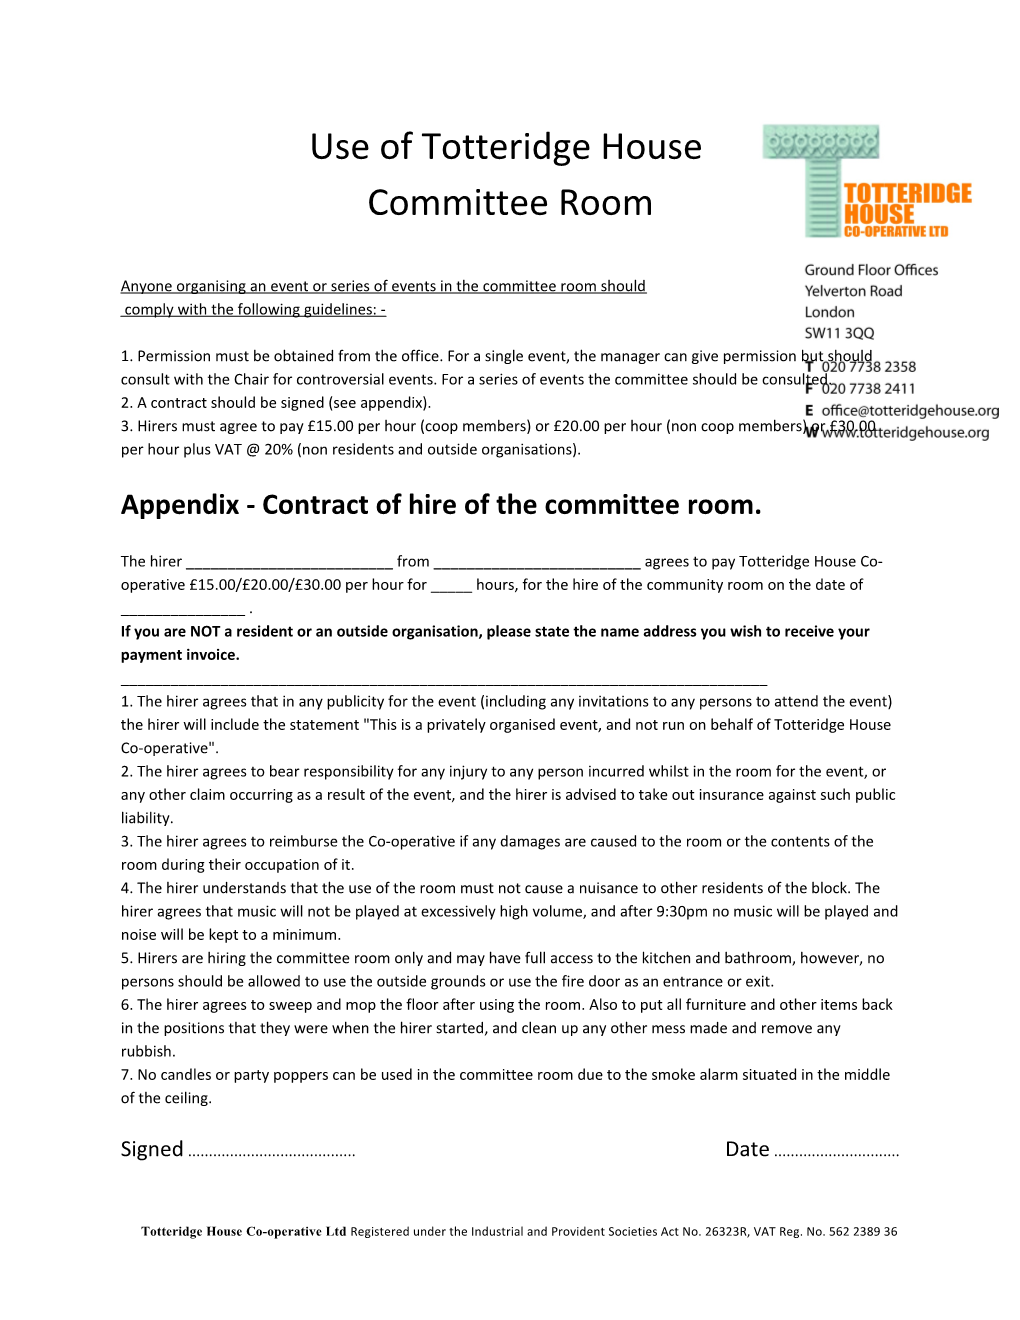 Anyone Organising an Event Or Series of Events in the Committee Room Should